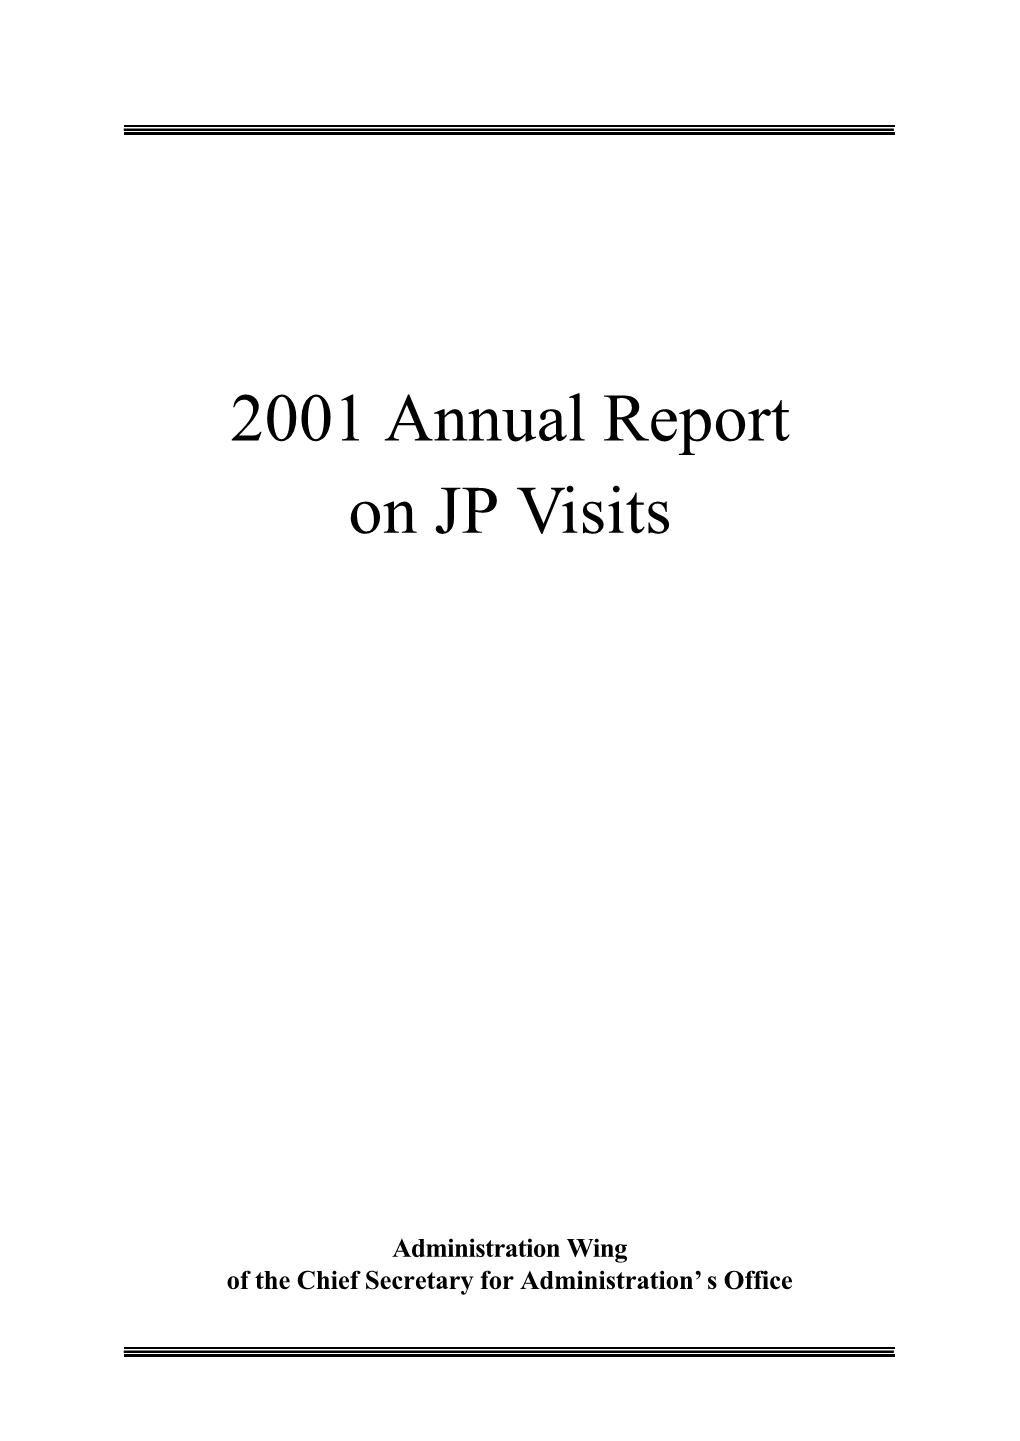 2001 Annual Report on JP Visits